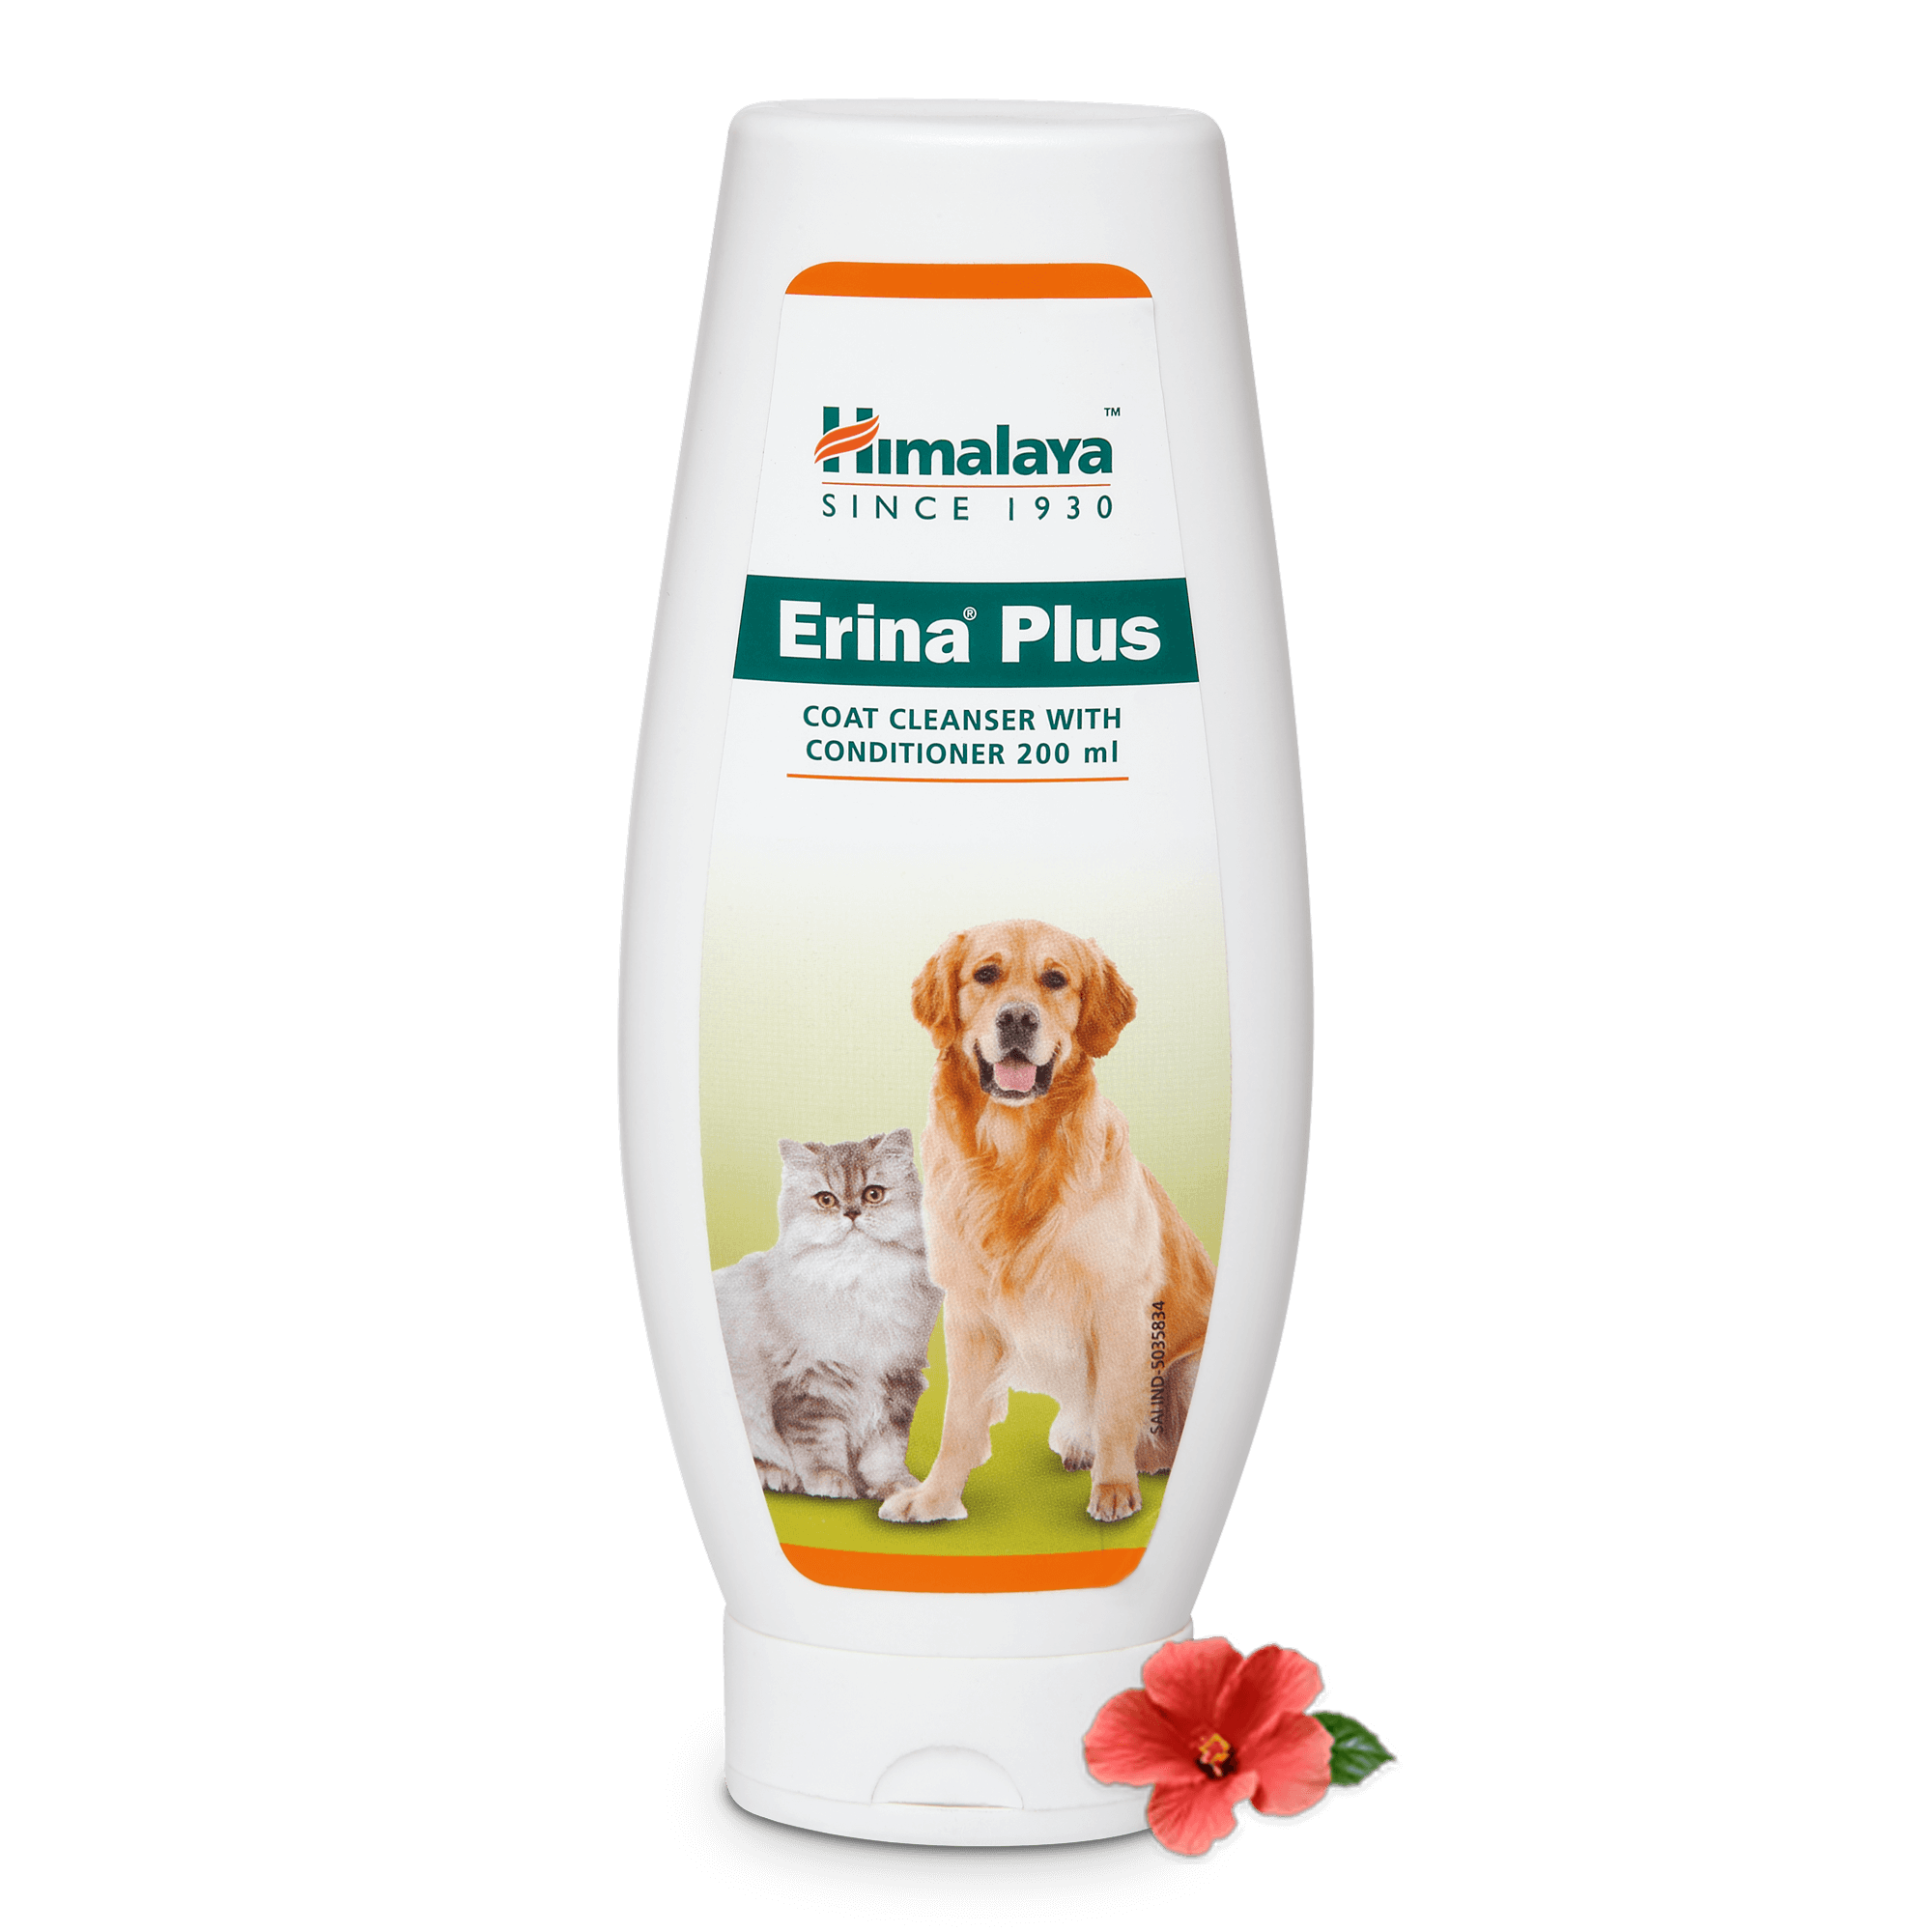 Himalaya Erina Plus - Coat Cleanser with Conditioner